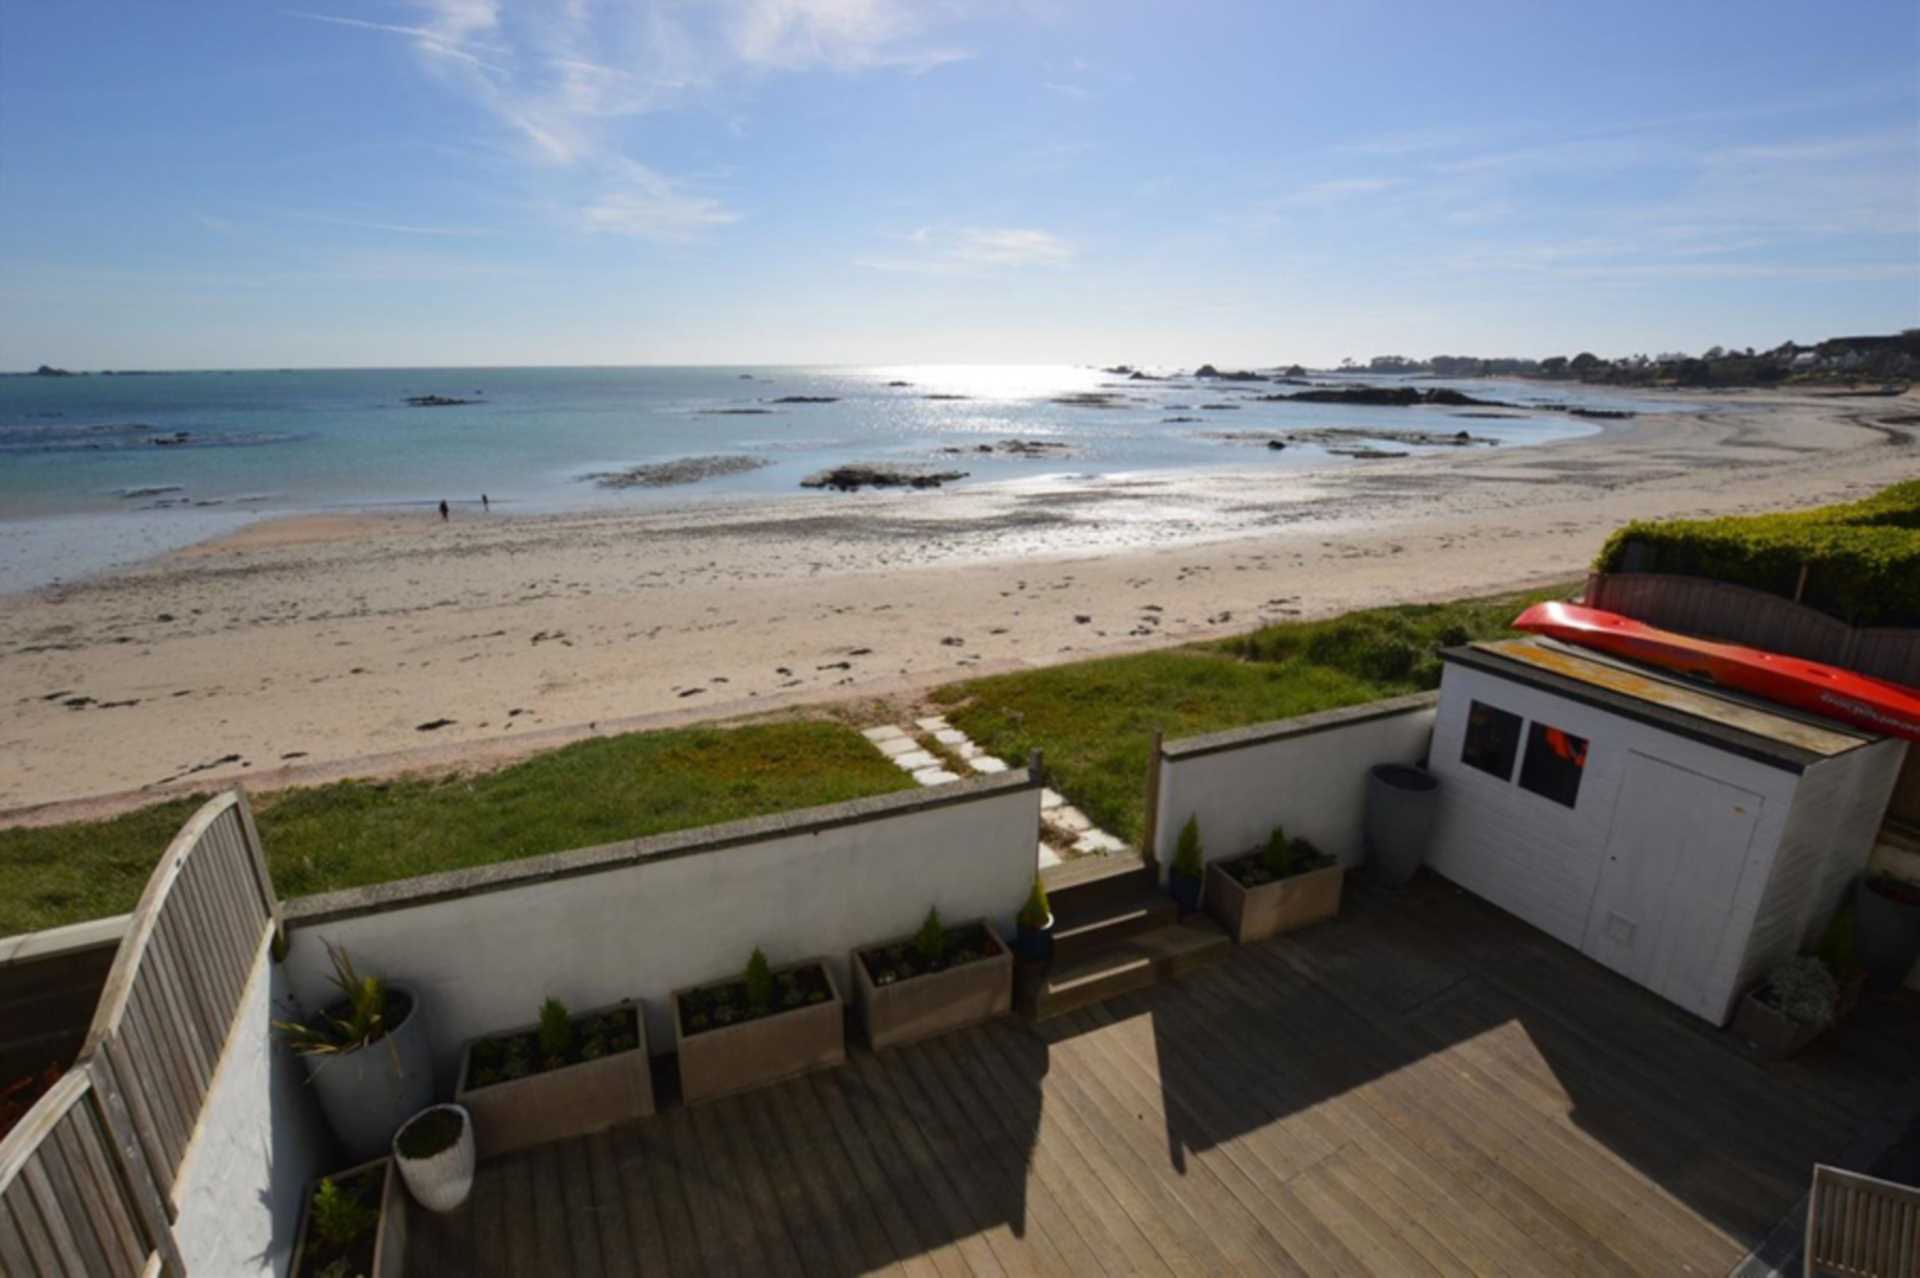 STUNNING 3 BEDROOM BEACH HOUSE TO RENT FROM JUNE JUST IN TIME FOR SUMMER ON THE BEACH, Image 4